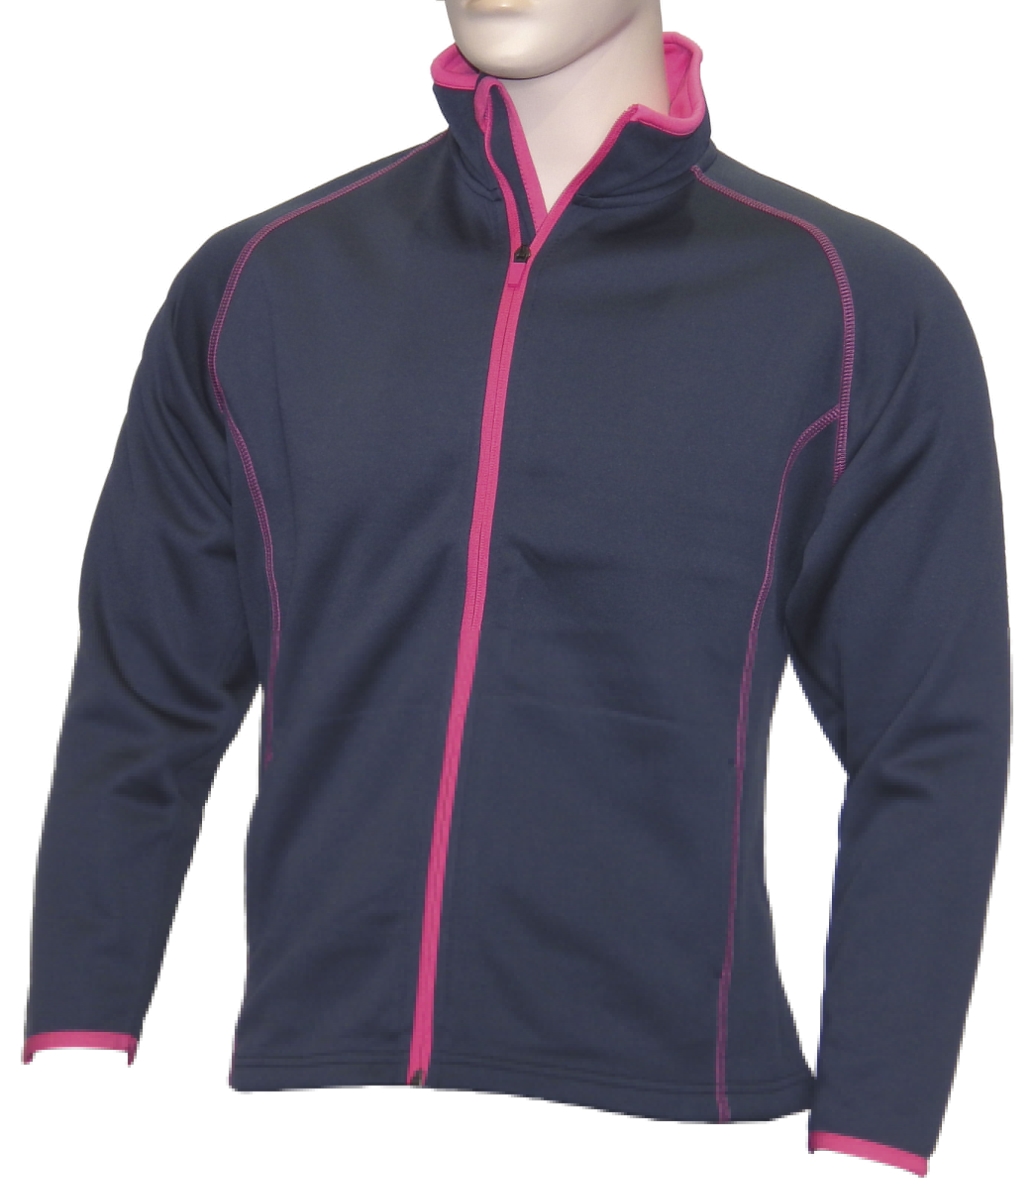 58026-051-SM Womens Poly-Spandex Jacket, Small - Navy with Pink